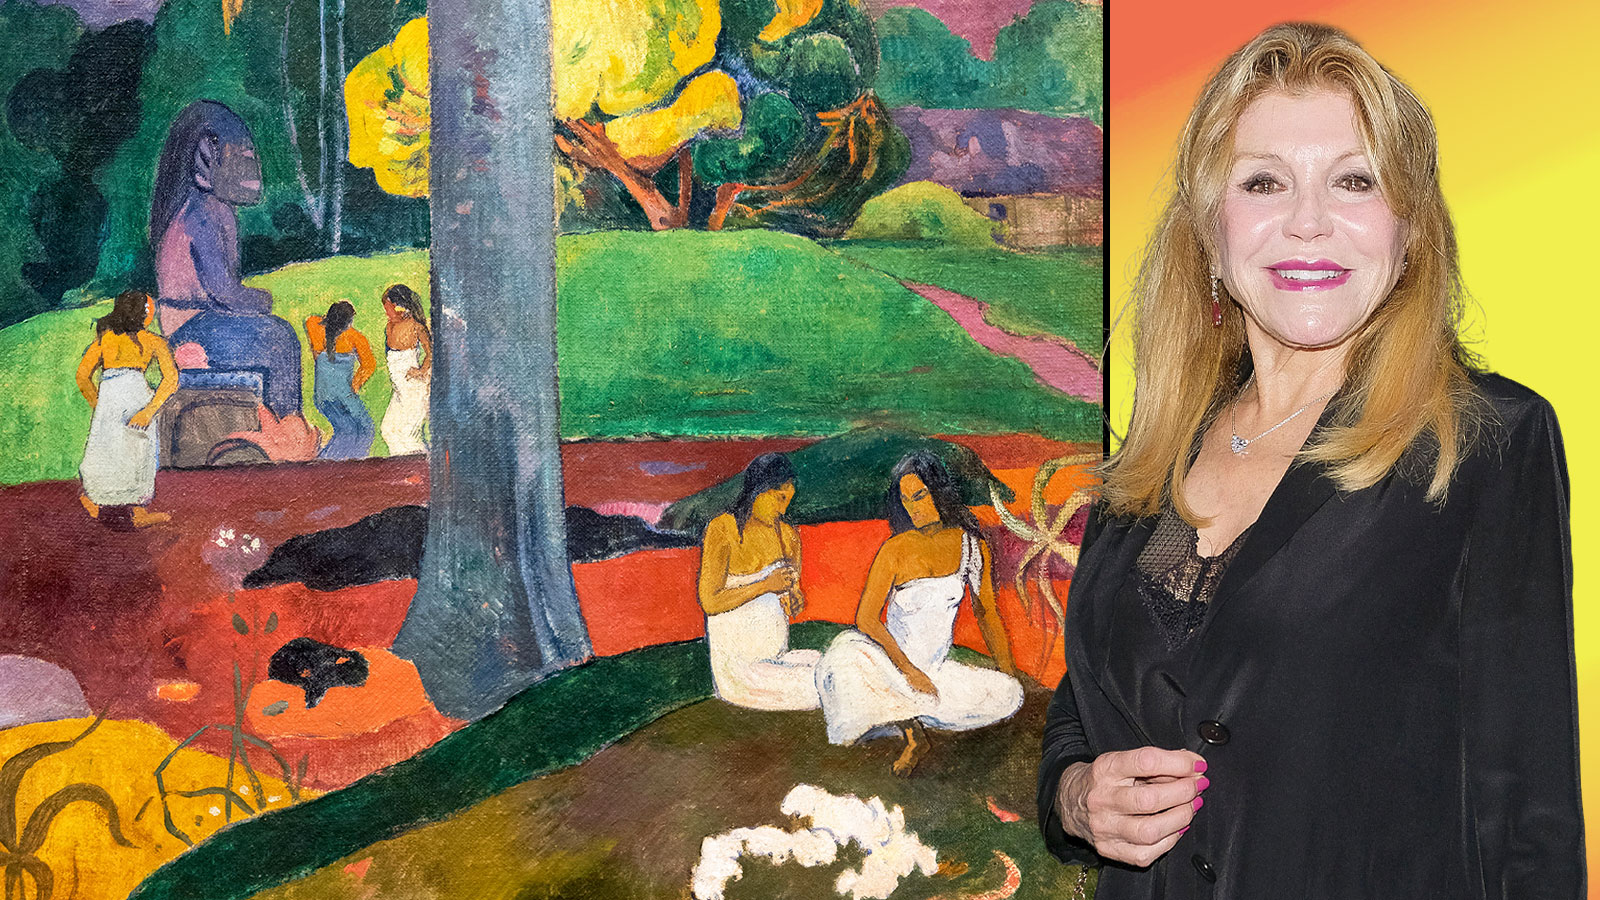 Carmen Cervera got €100 million from the Spanish government in 2021 to rent her collection, which includes the Gauguin masterpiece Mata Mua